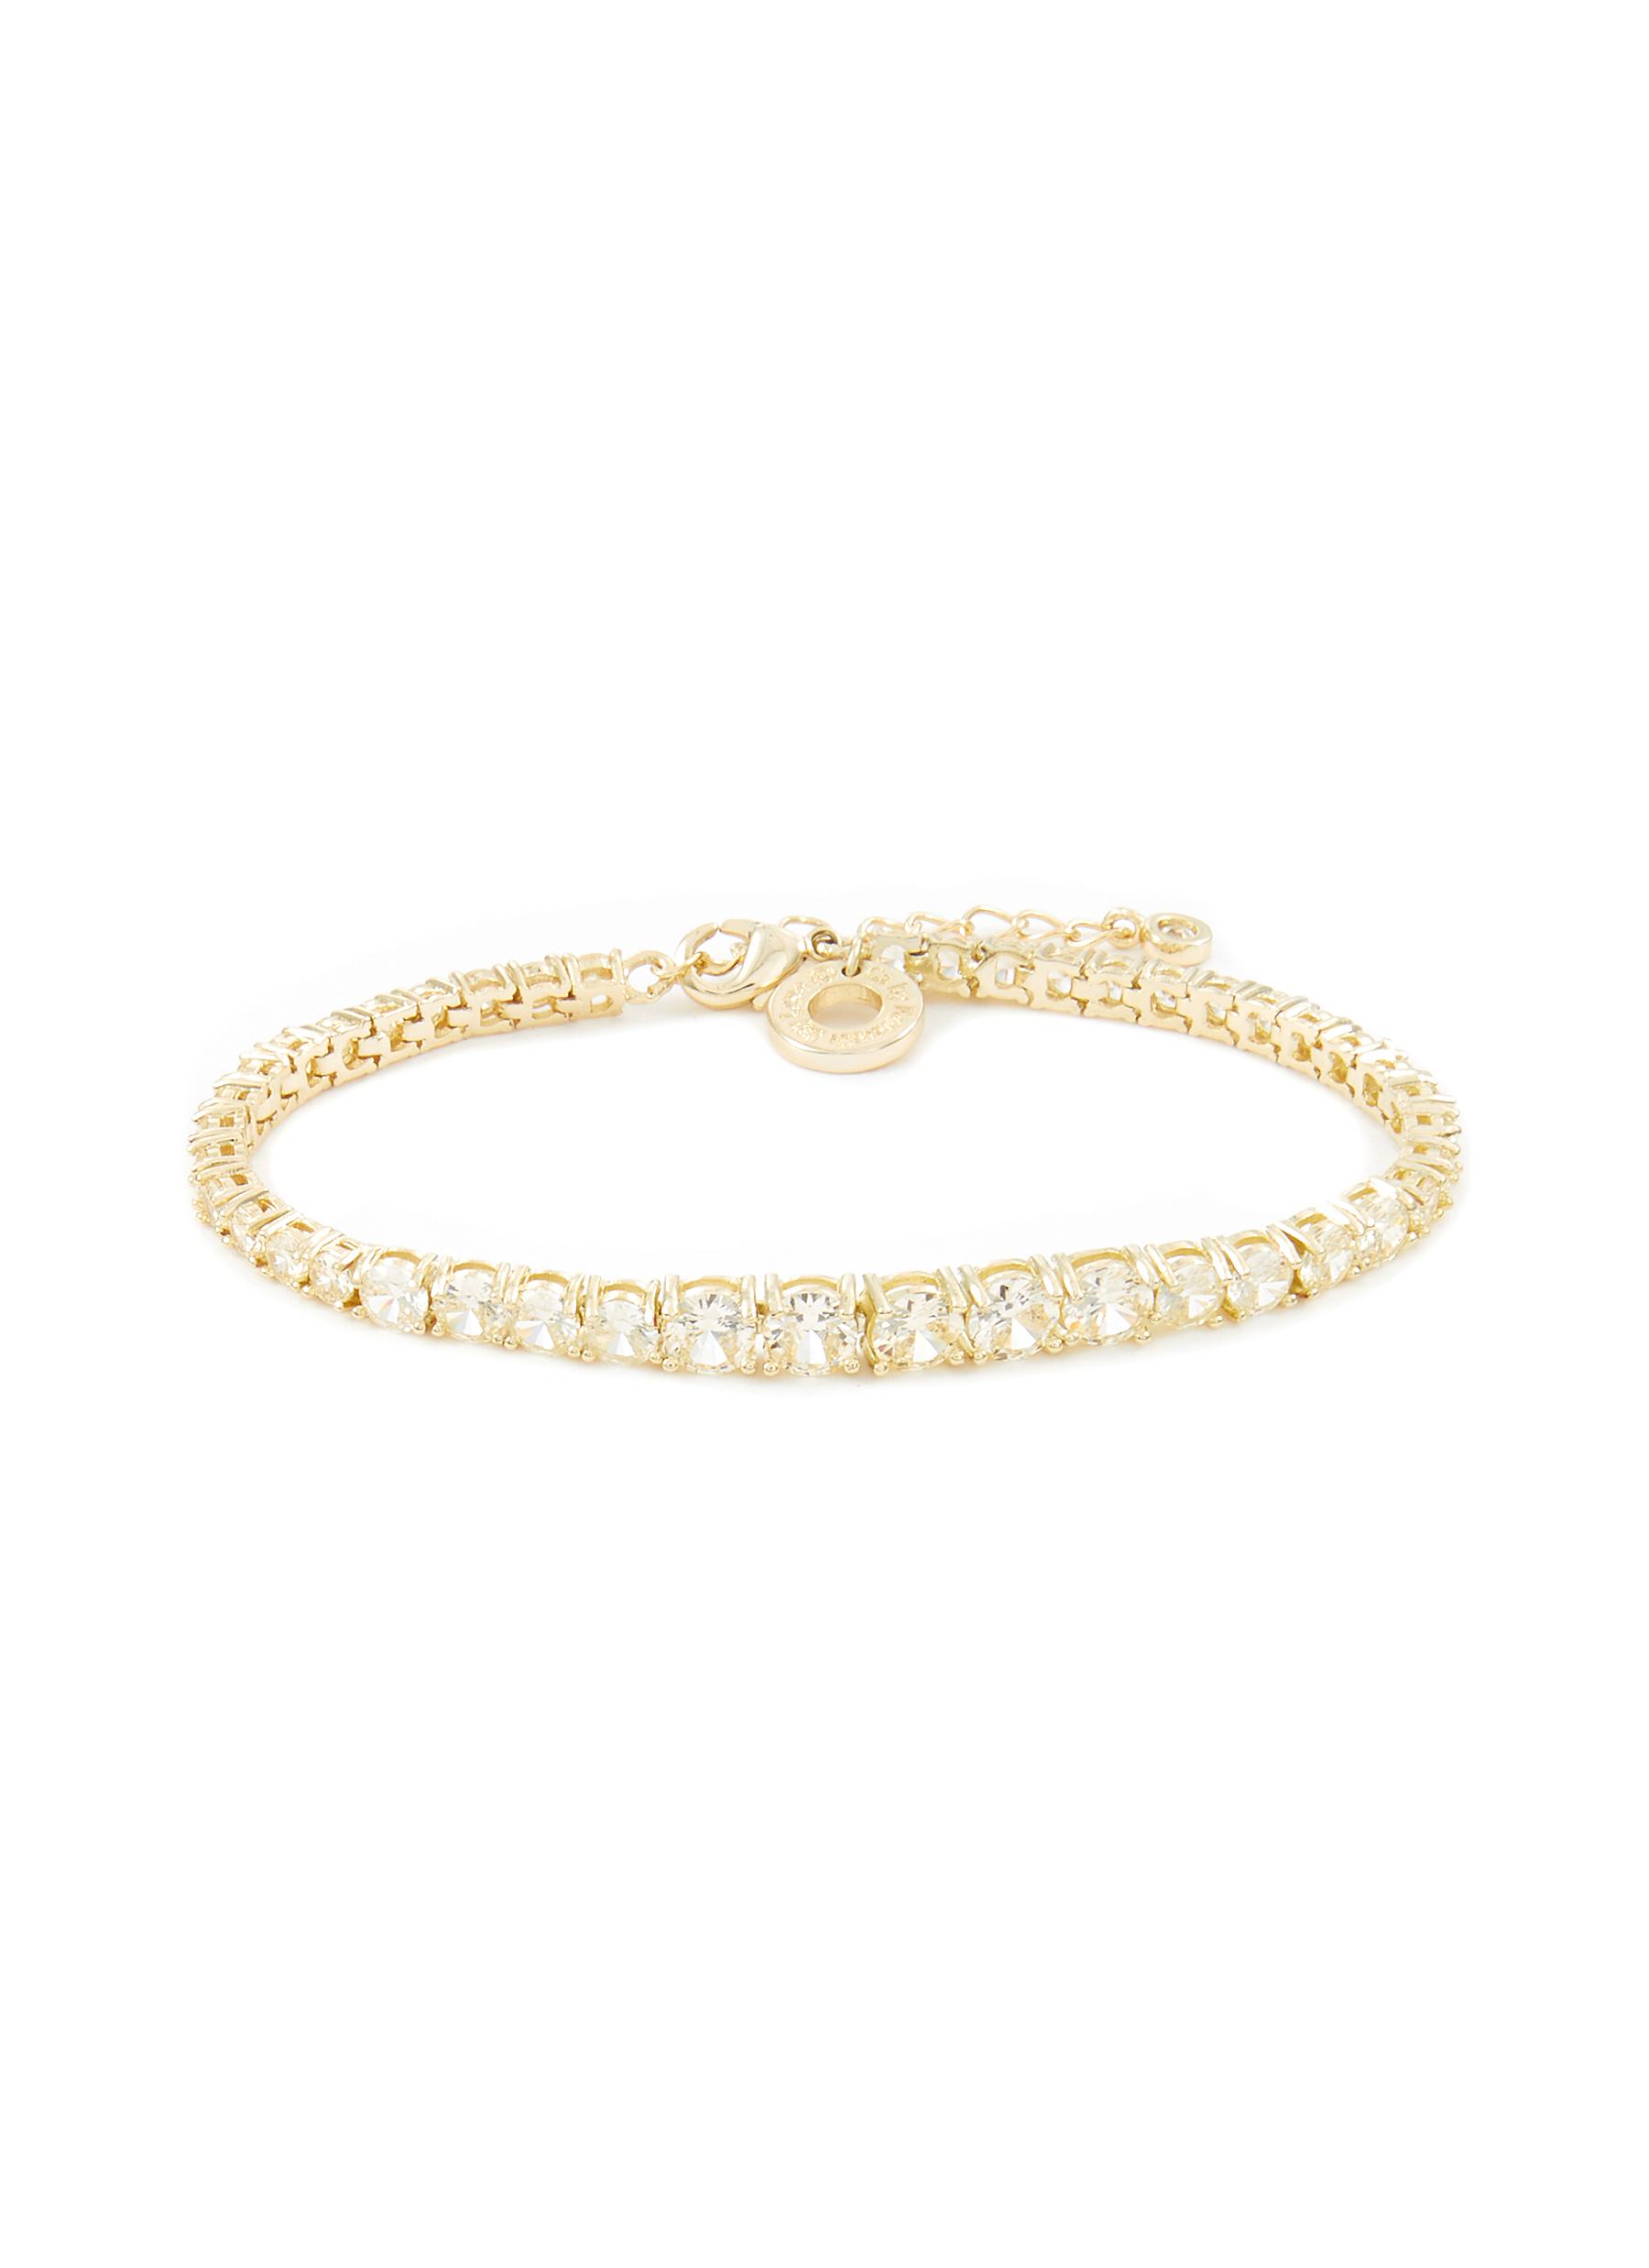 CZ BY KENNETH JAY LANE Gold Toned Metal Graduated Round Cut Cubic Zirconia Bracelet